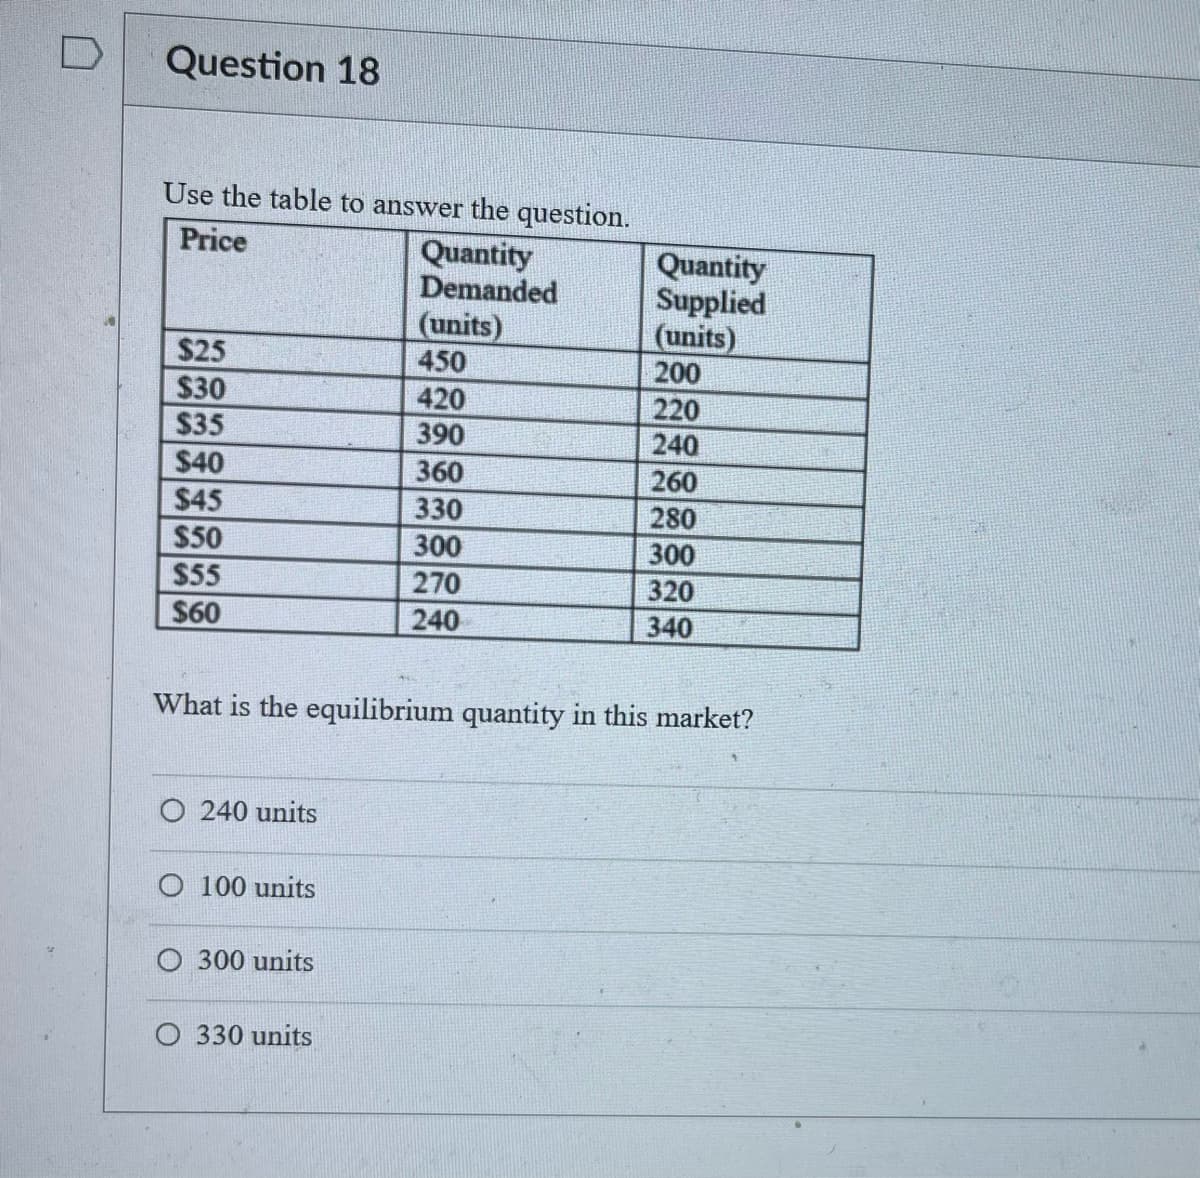 D
Question 18
Use the table to answer the question.
Price
Quantity
Demanded
$25
$30
$35
$40
$45
$50
$55
$60
O 240 units
What is the equilibrium quantity in this market?
O 100 units
O 300 units
(units)
450
420
390
360
330
300
270
240
O 330 units
Quantity
Supplied
(units)
200
220
240
260
280
300
320
340